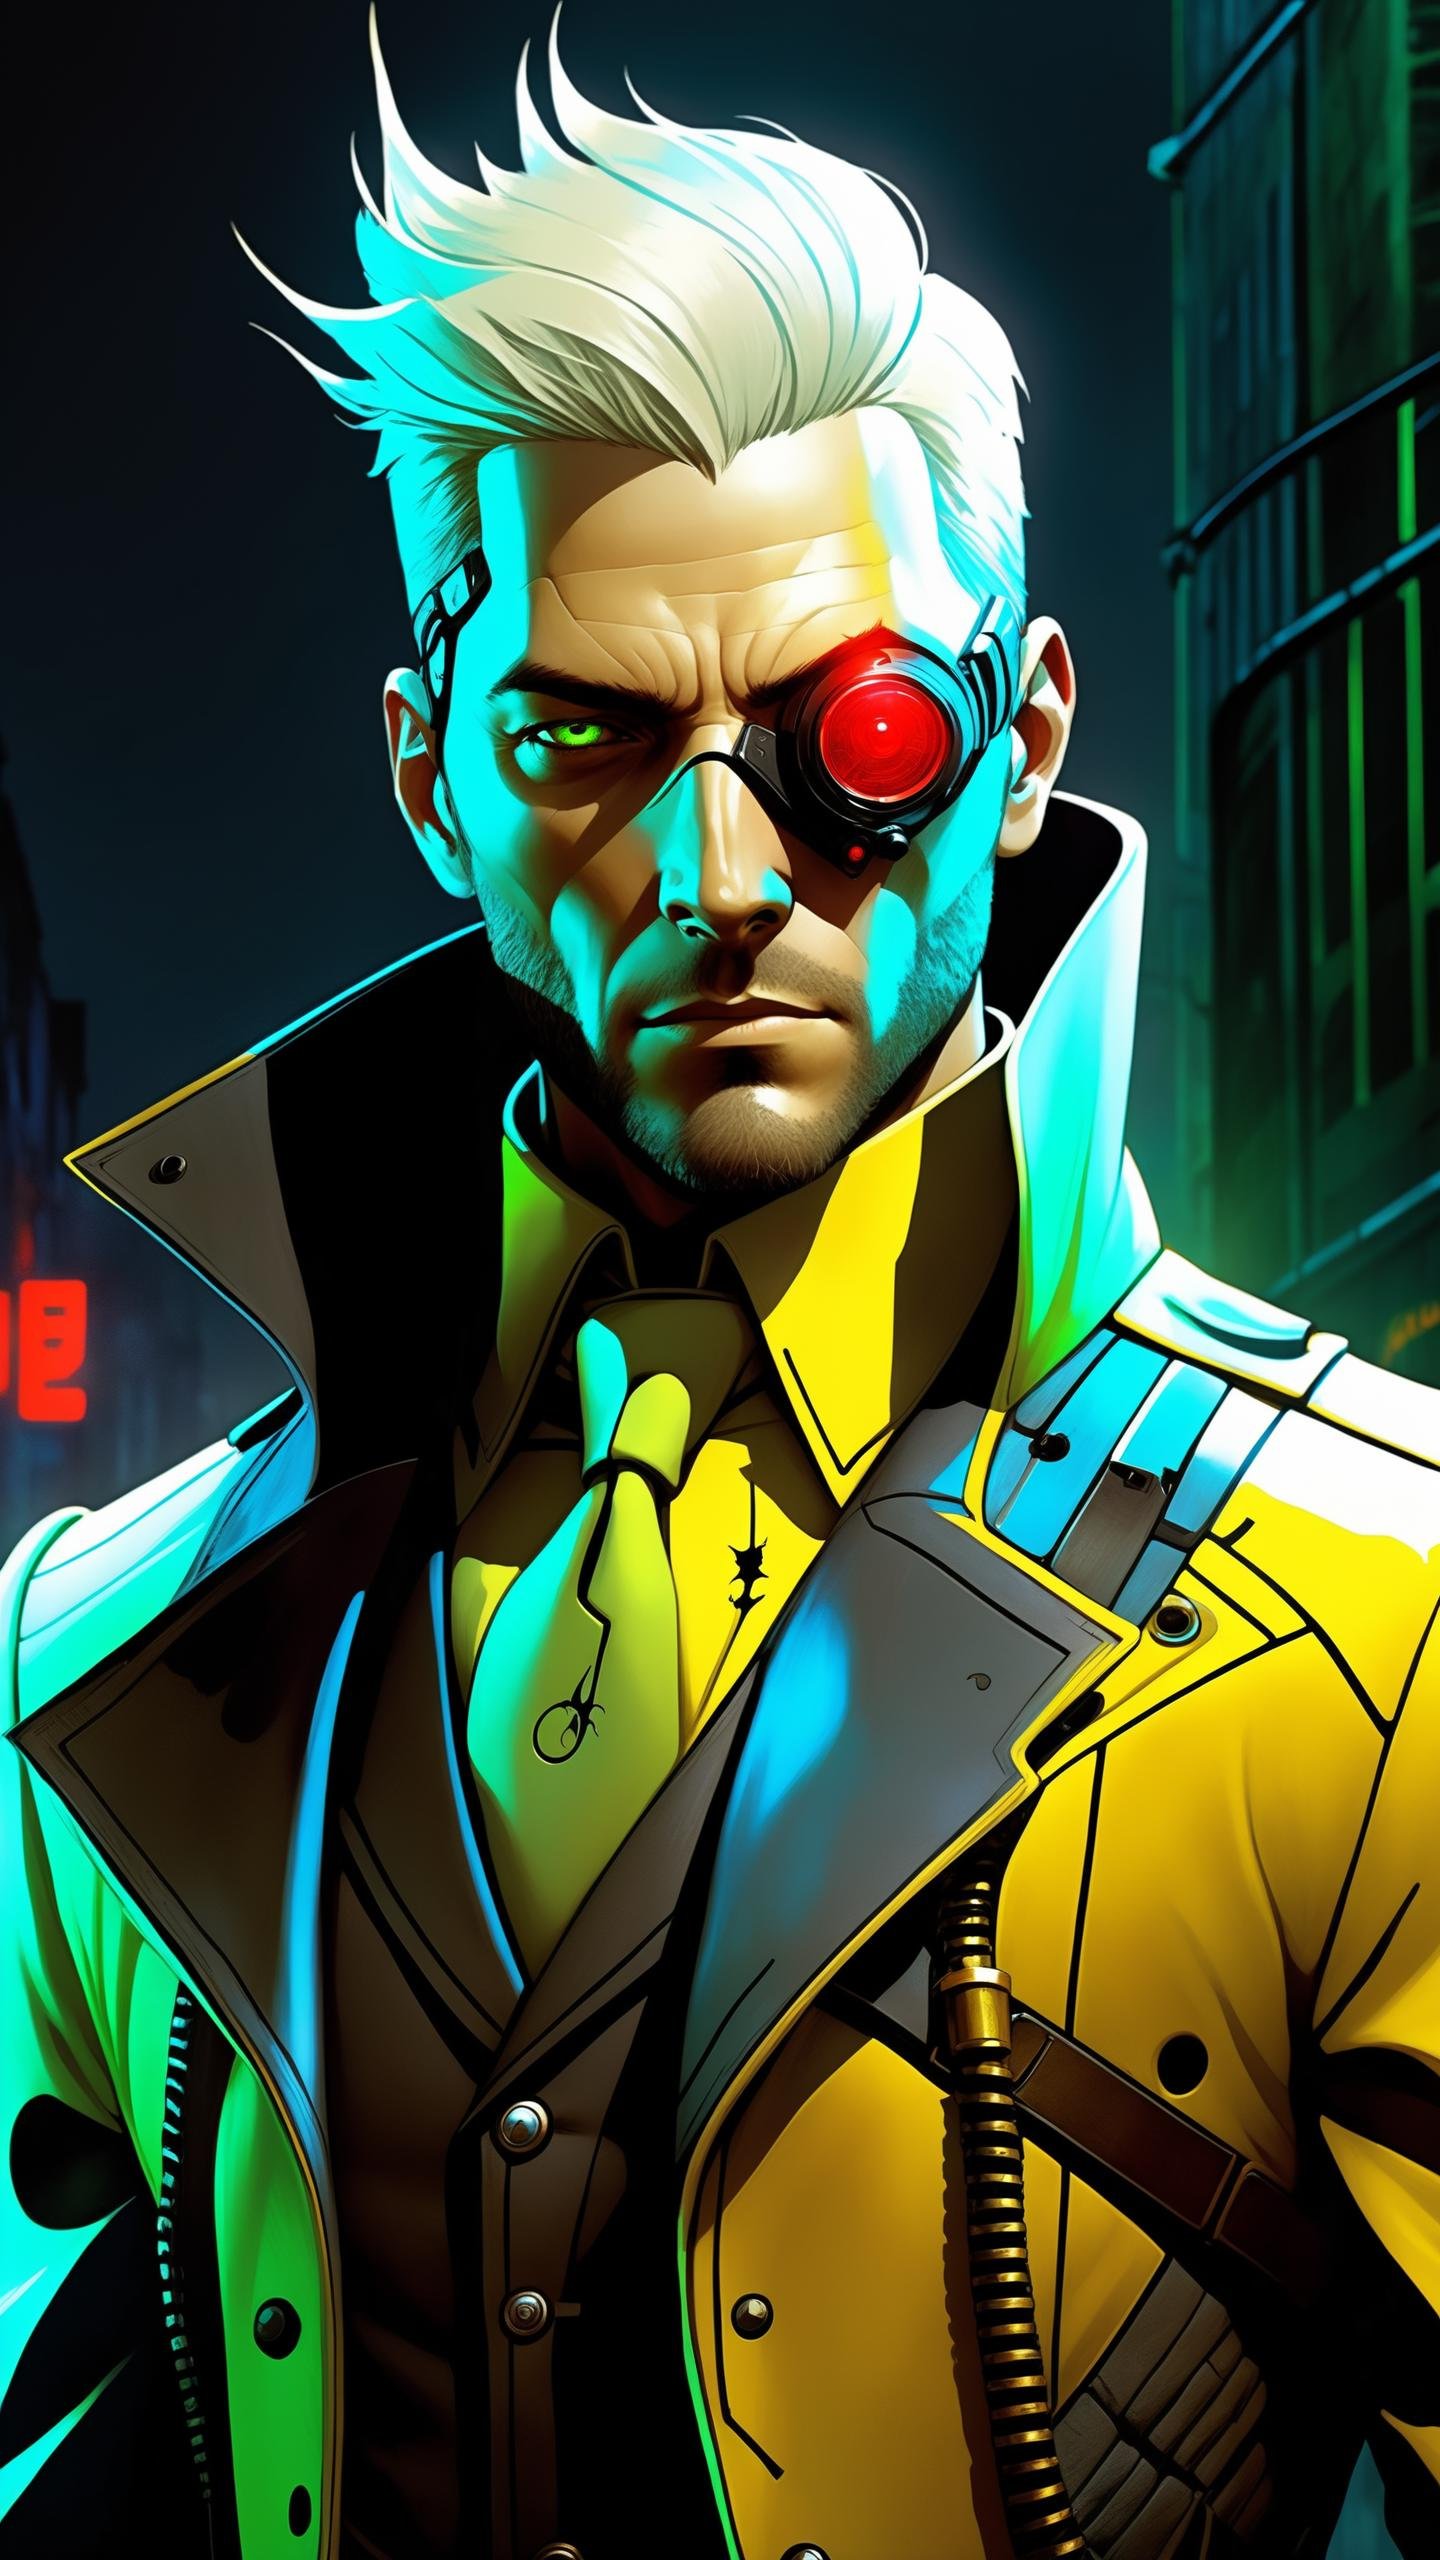 "man with a pretty face, white hair, green eyes, ((aiden pearce, wearing a stylish cyberpunk uniform, wearing dedsec mask)), with a serious expression on his face, Hell walker, incombing death, hell, black bloody veins growing and intertwining out of the darkness, oozing thick yellow blood, veins growing and pumping blood, (male body:1.6), 1 man, vascular networks growing, connecting, explanding, red veins everywhere, zdzislaw beksinski, (sharp colors:1.3), (rainbow skin:1.1), (steampunk:1.2), ultra detailed, intricate, oil on canvas, ((dry brush, ultra sharp)), (surrealism:1.4), (disturbing:1.5), beksinski style painting, satanic symbols, (full torso), full body in frame, centered body, (male:1.2), realistic, ((intricate details)), (pale gothic evil king), dynamic pose, perfect face, (realistic eyes), perfect eyes, ((dark gothic background)), sharp focus, cartoon